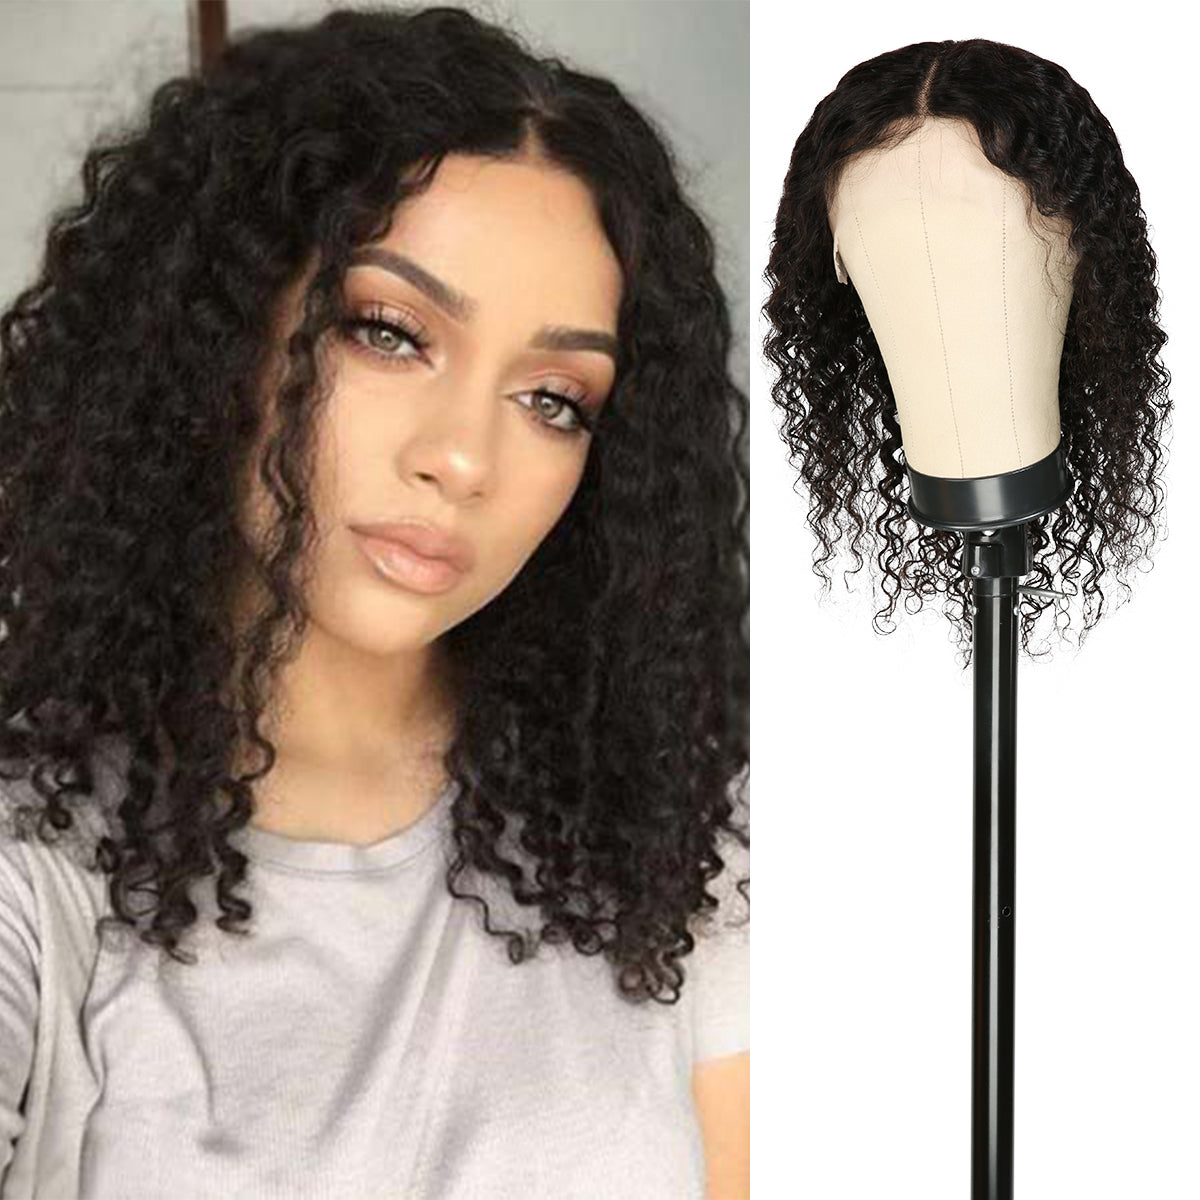 The T Part lace wig is a beginner-friendly wig which is the most affordable wig types, It’s wearable right out the box, so you don’t need to know a lot about wig styling to wear the T part. Pre-plucked Natural Hairline with Center Parting, Best summer vacation wigs, Best curly wig on tiktok, Low maintenance hairstyle